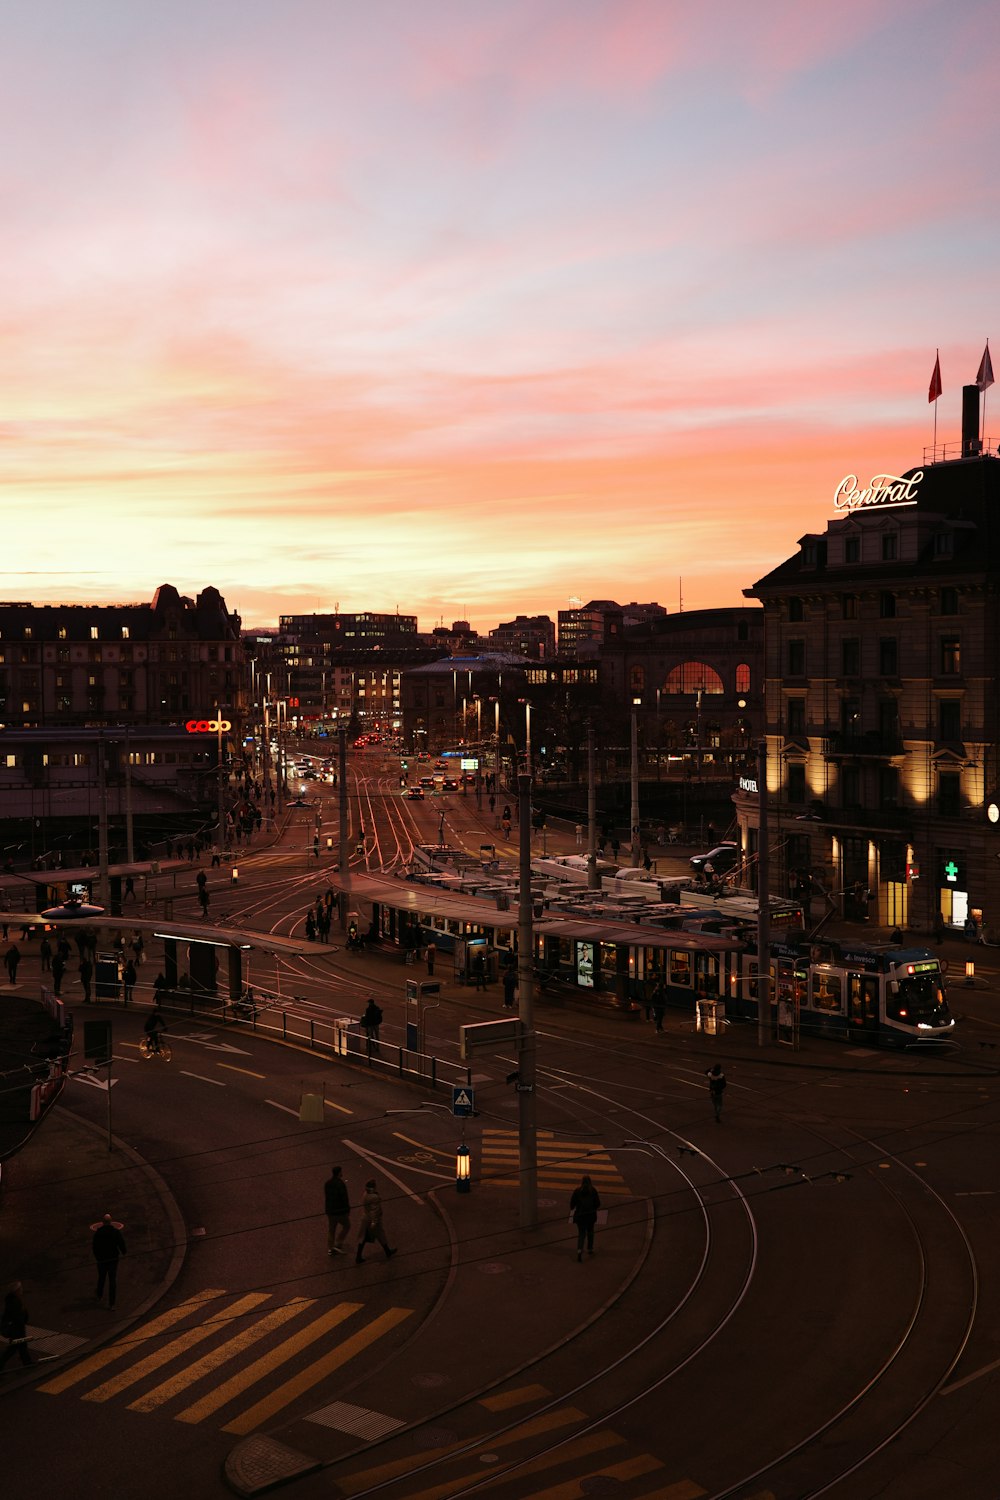 a sunset view of a city street with a train station in the background